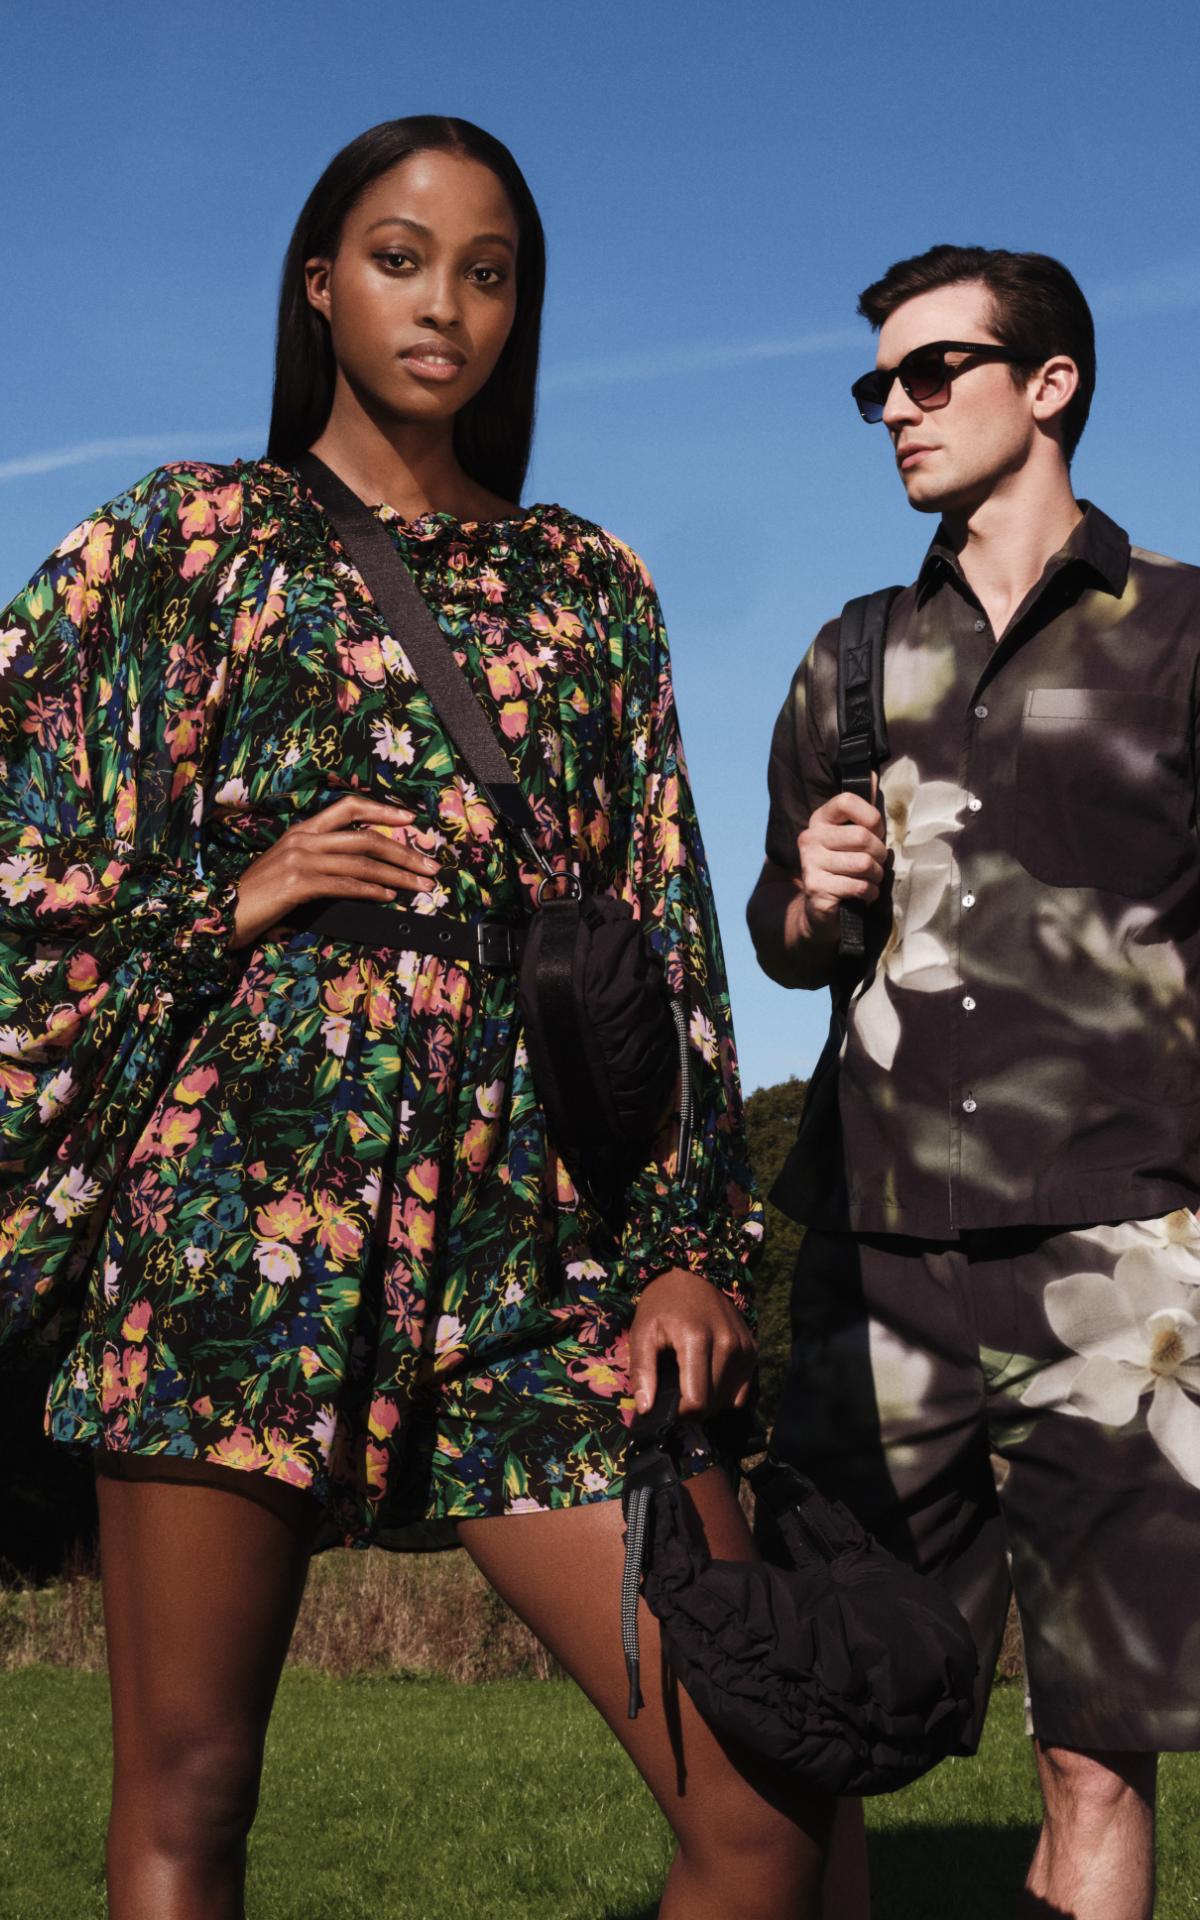 Ted Baker hero image mens womens lifestyle at Bicester Village